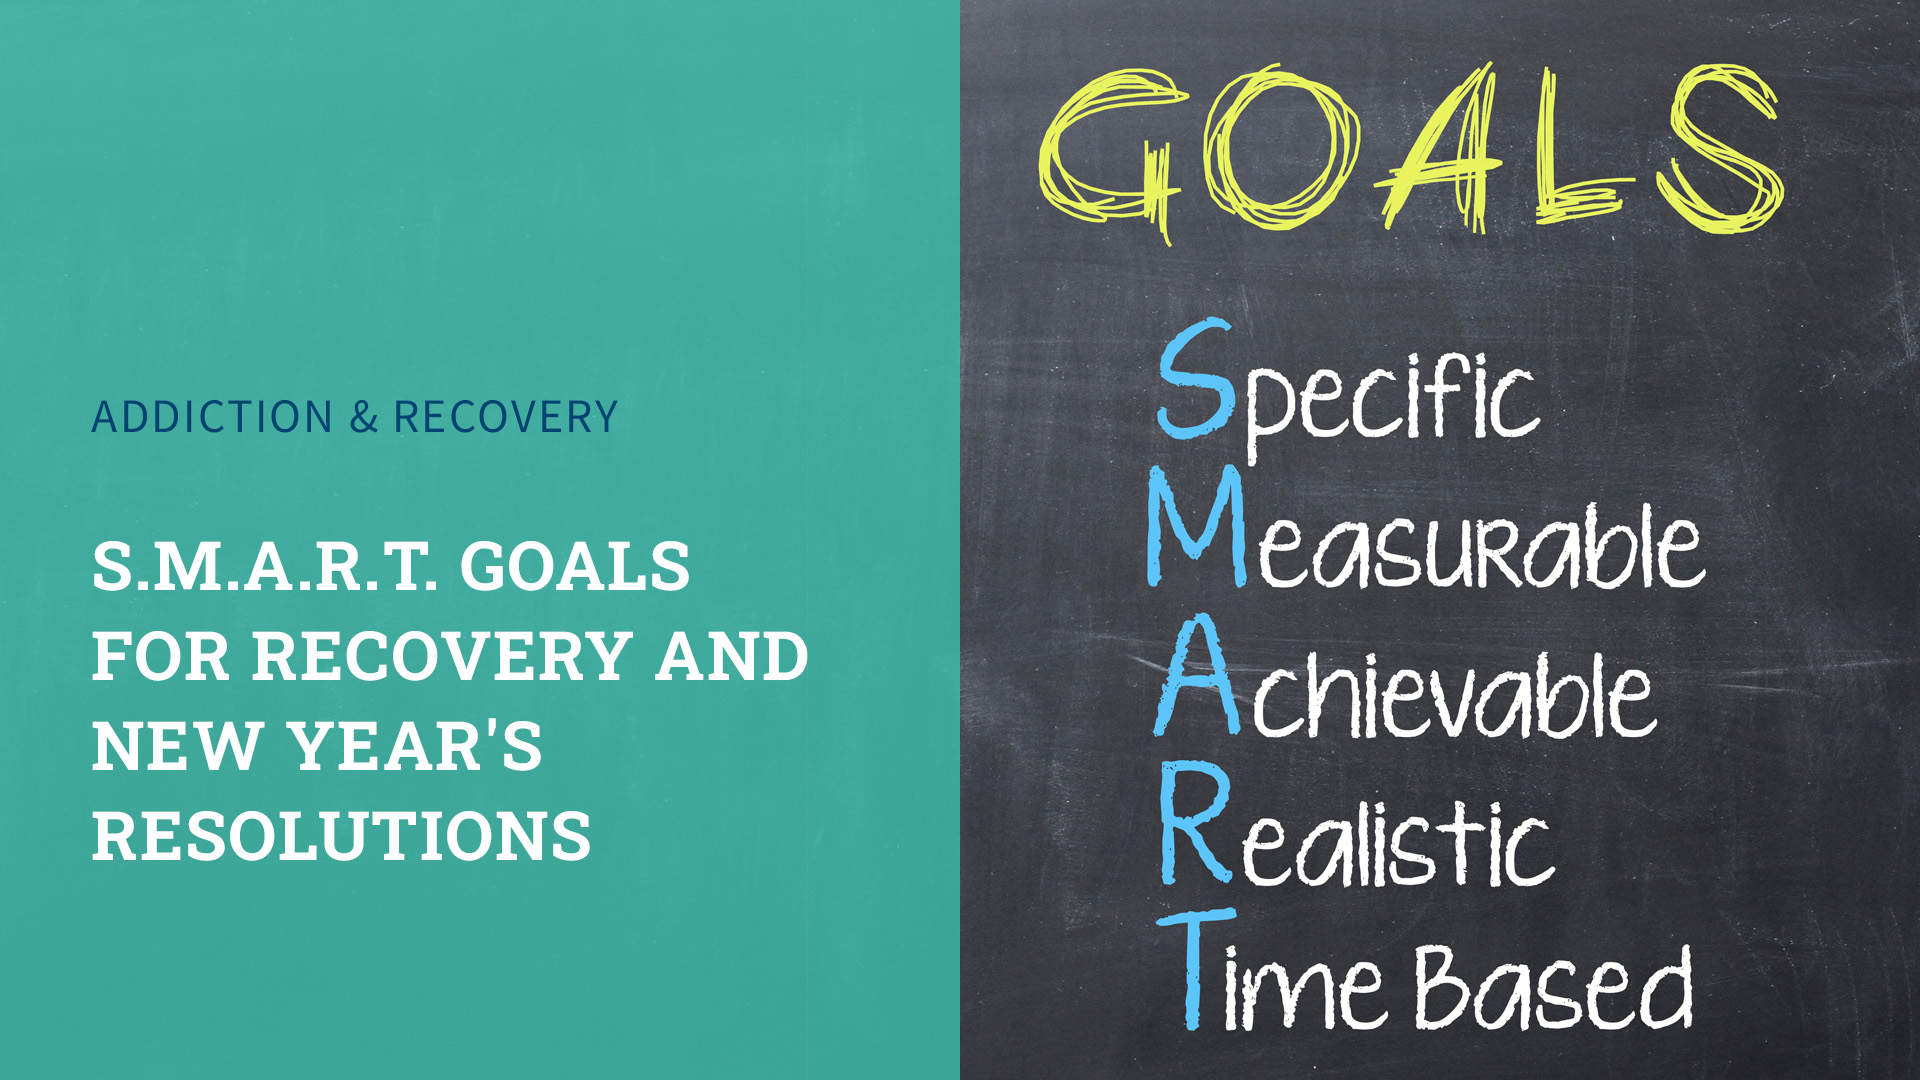 S.M.A.R.T. Goals for Recovery and New Year’s Resolutions